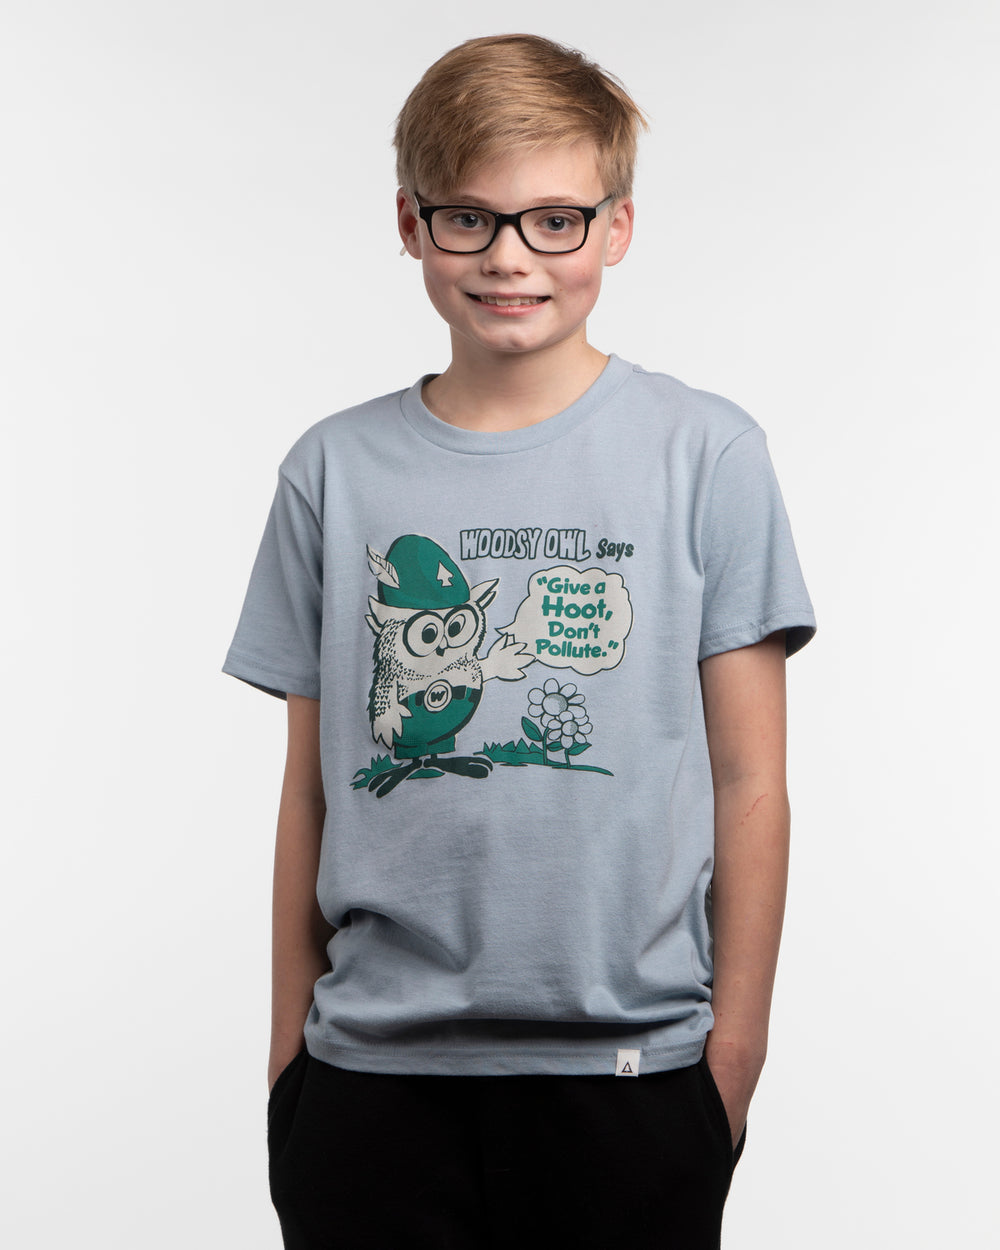 Woodsy Says Youth Tee Short Sleeve  